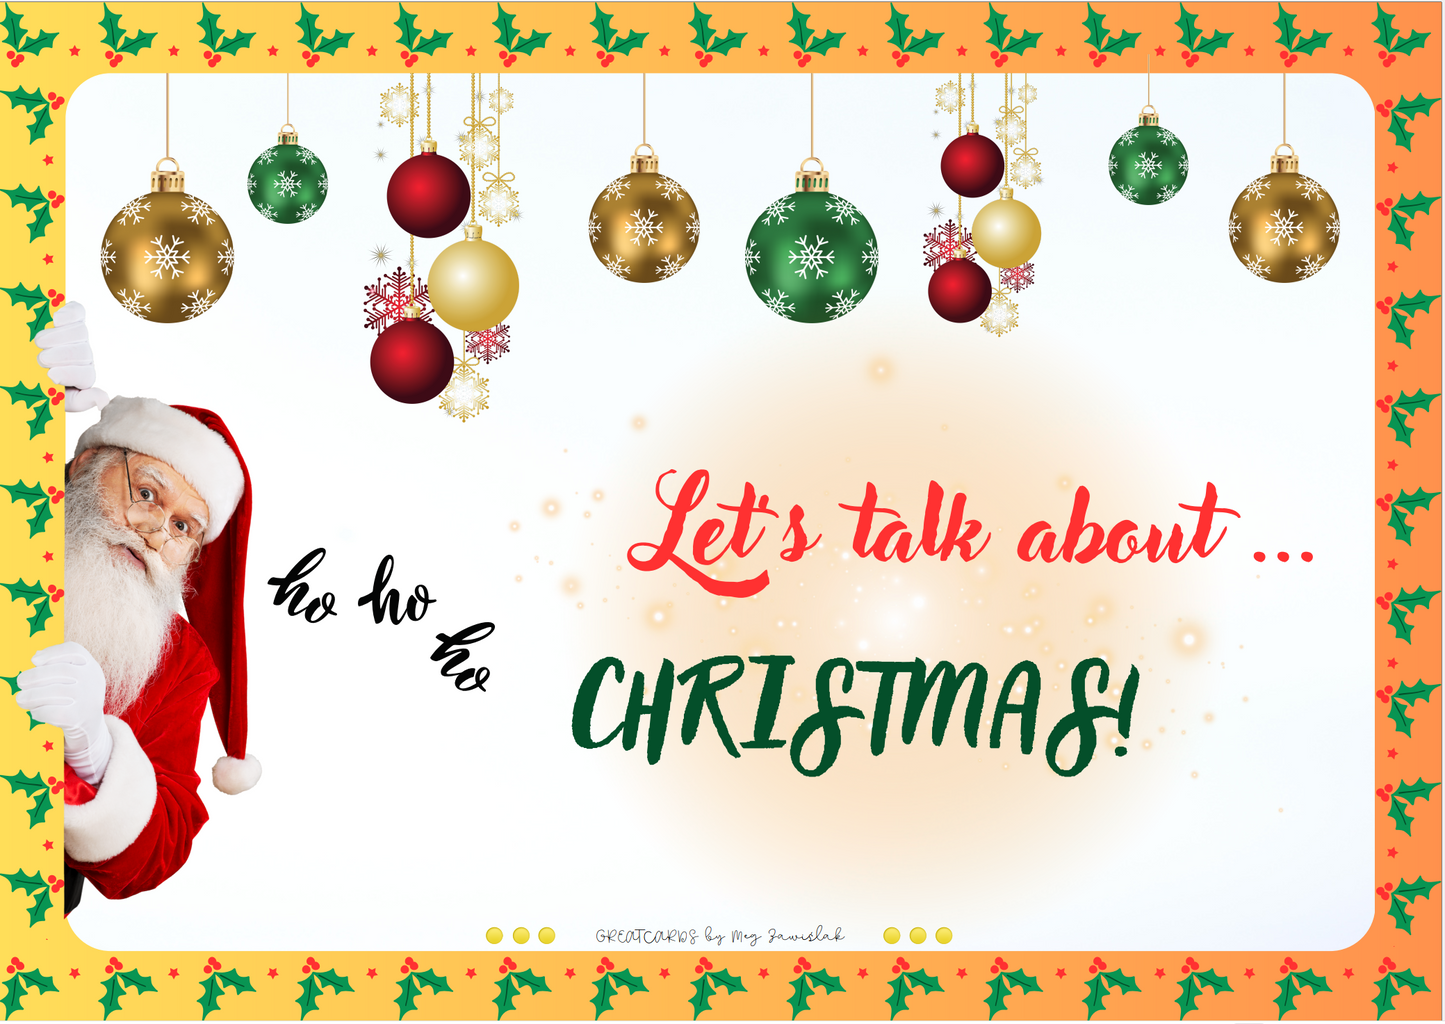 Let's talk about Christmas (FREE)